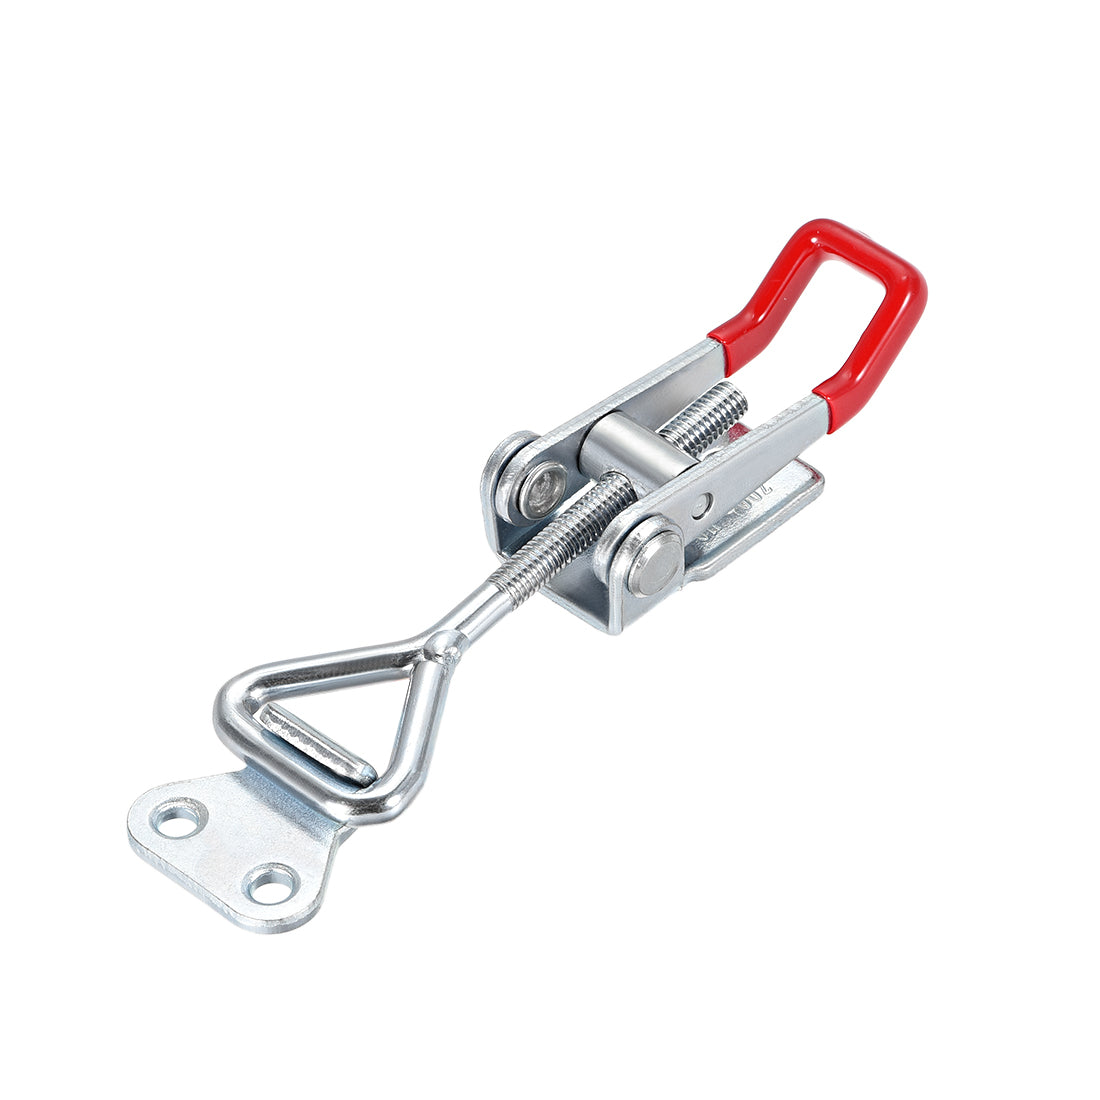 uxcell Uxcell Hand Tool Latch Action Toggle Clamp Quick Release Clamp 500 lbs/220kg Holding Capacity